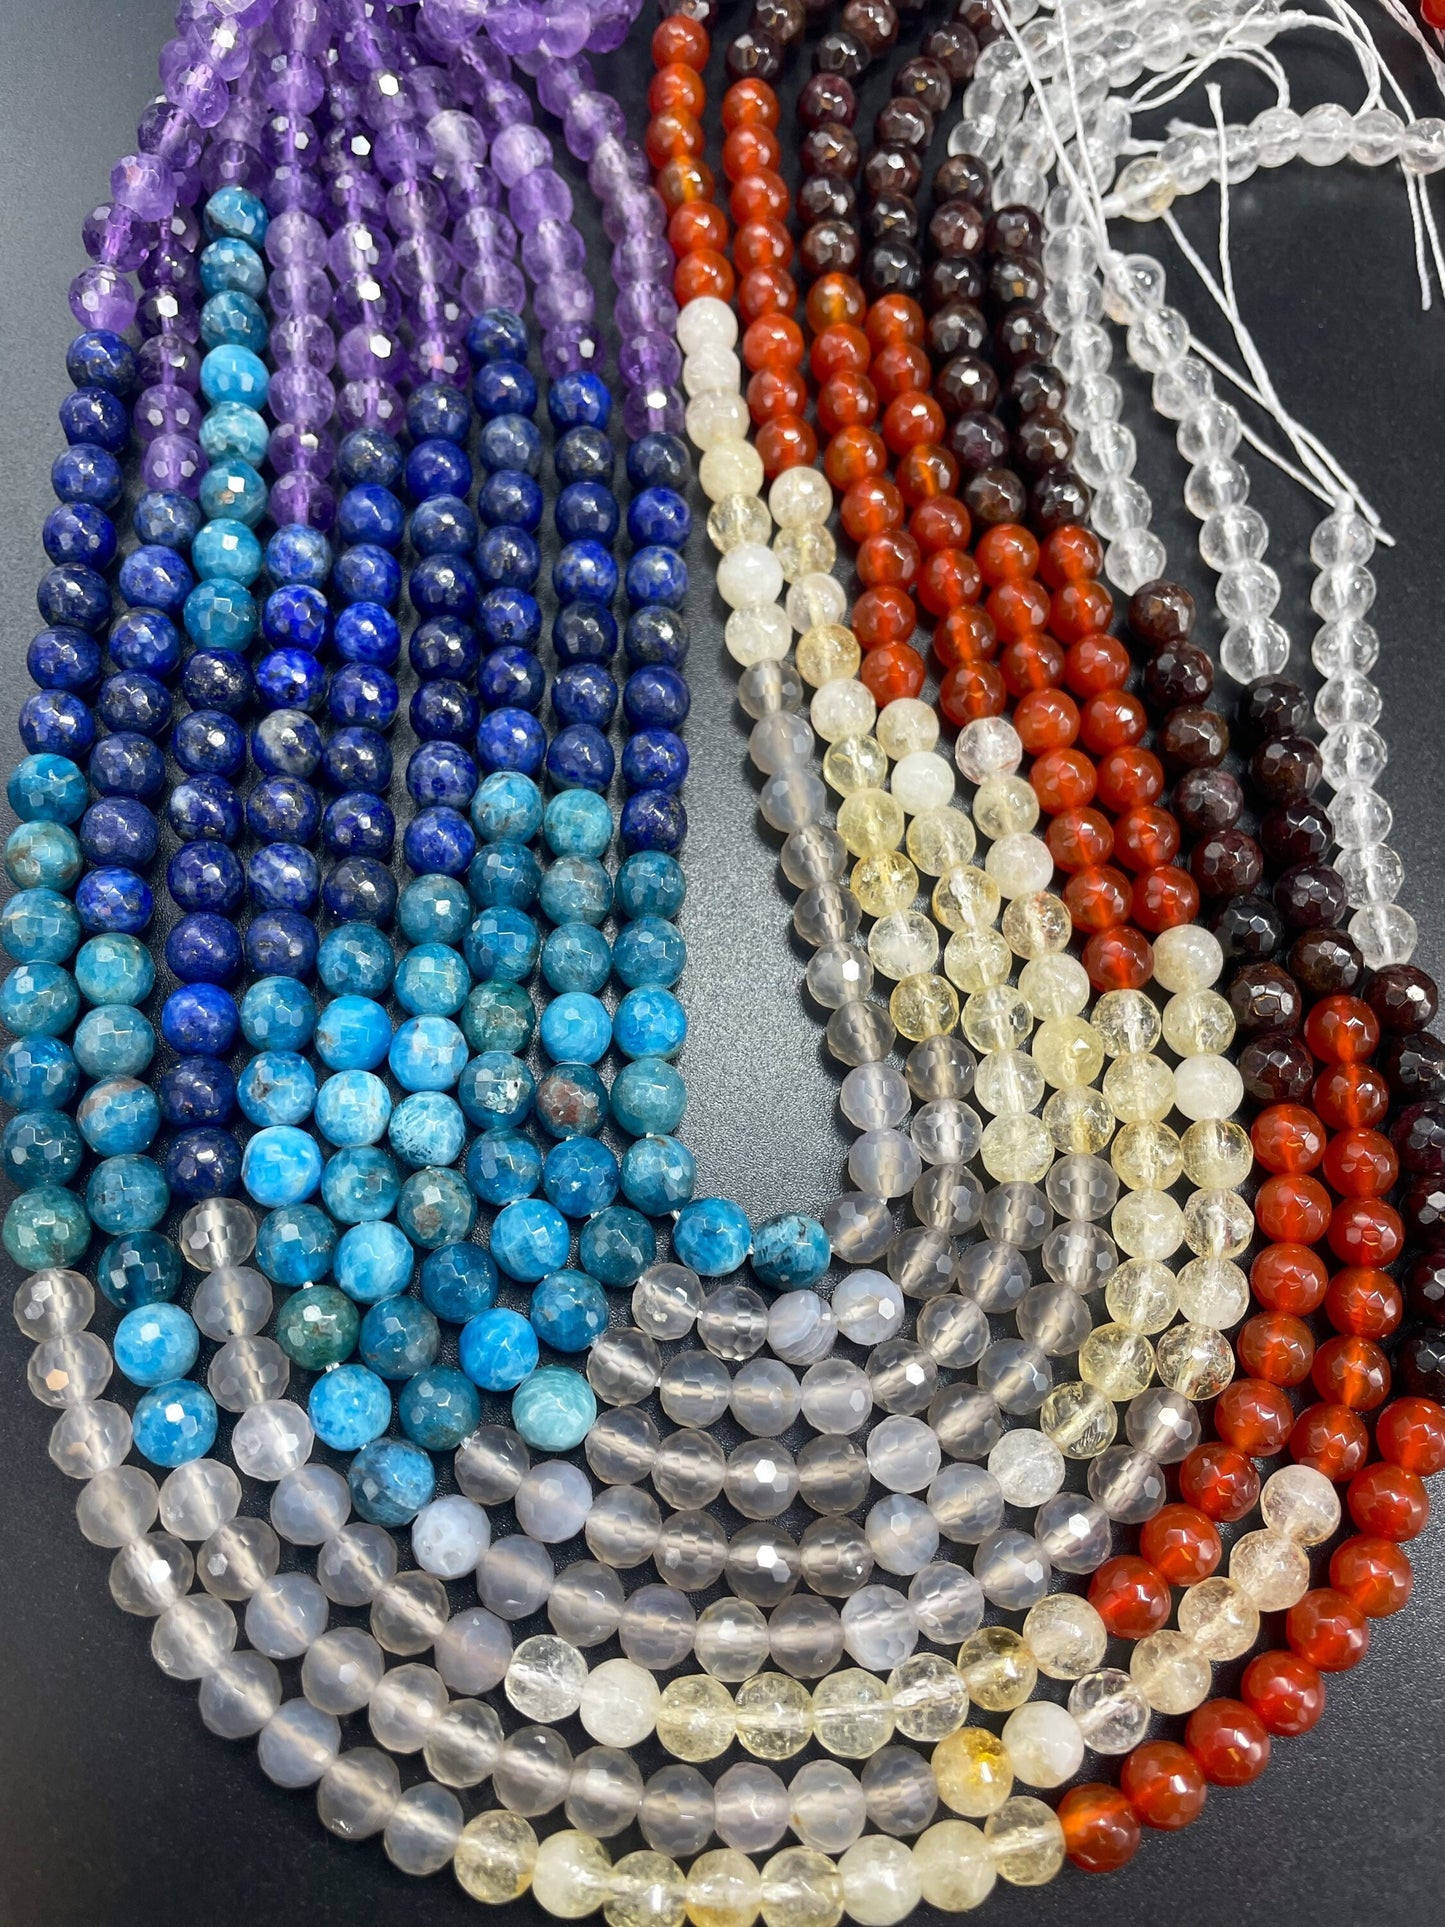 AAA Natural Chakra Gemstone Bead Faceted 4mm 6mm 8mm 10mm 12mm Round Bead, Beautiful Multicolor Gemstone Beads